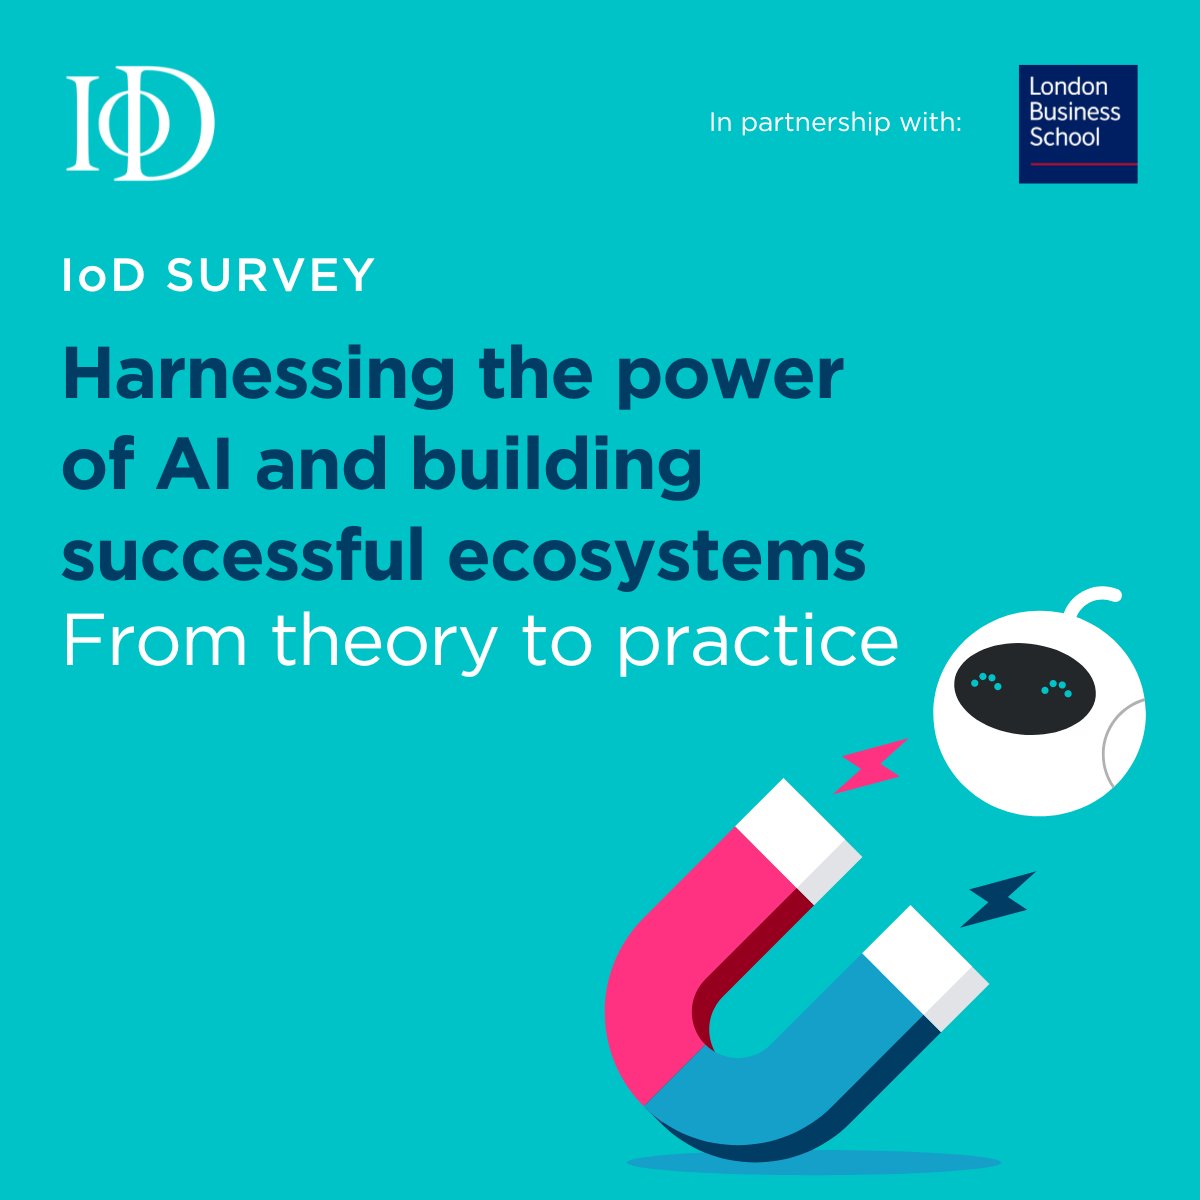 📢 A reminder that our joint survey with @LondonBSchool is still live! If you’re an IoD Member, check your inbox for your link to contribute now 📨 ➡️ If you’re not an IoD Member, but would like to contribute, you can complete the survey here: lbs.eu.qualtrics.com/jfe/form/SV_8B…